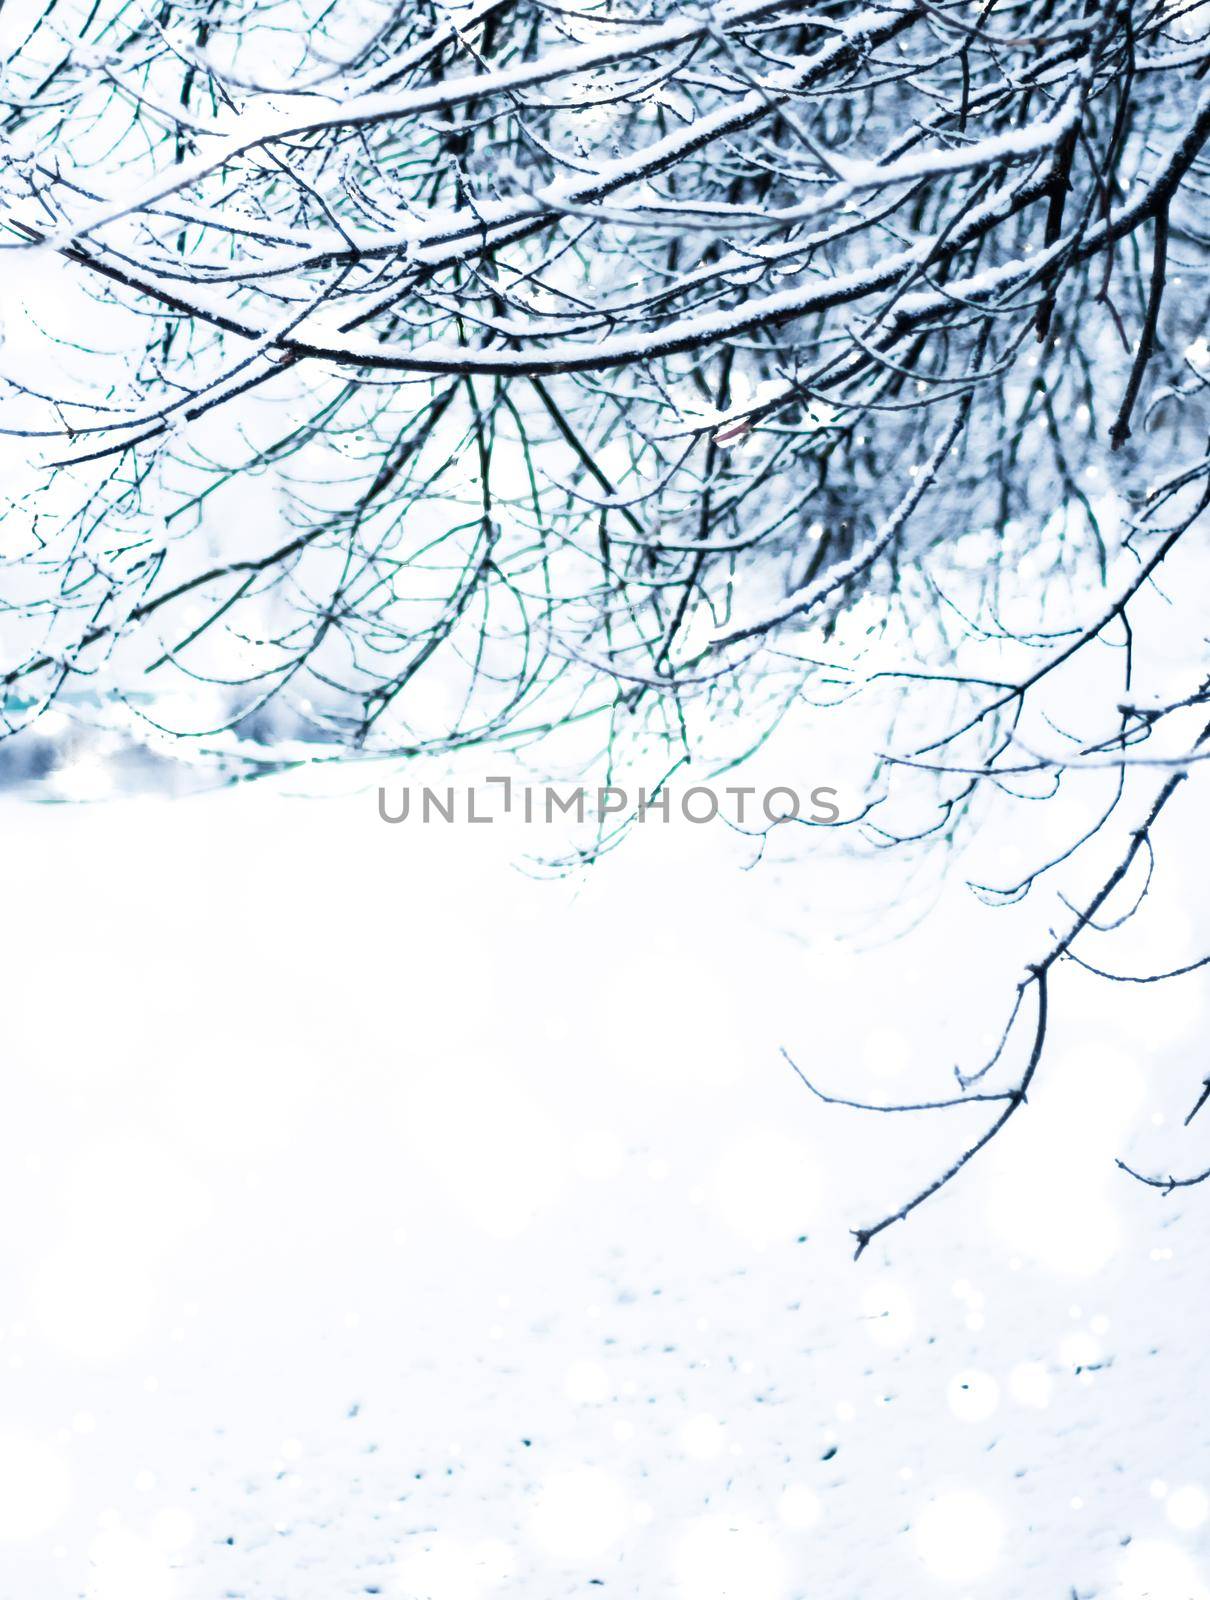 Winter holiday background, nature scenery with shiny snow and cold weather in forest at Christmas time by Anneleven